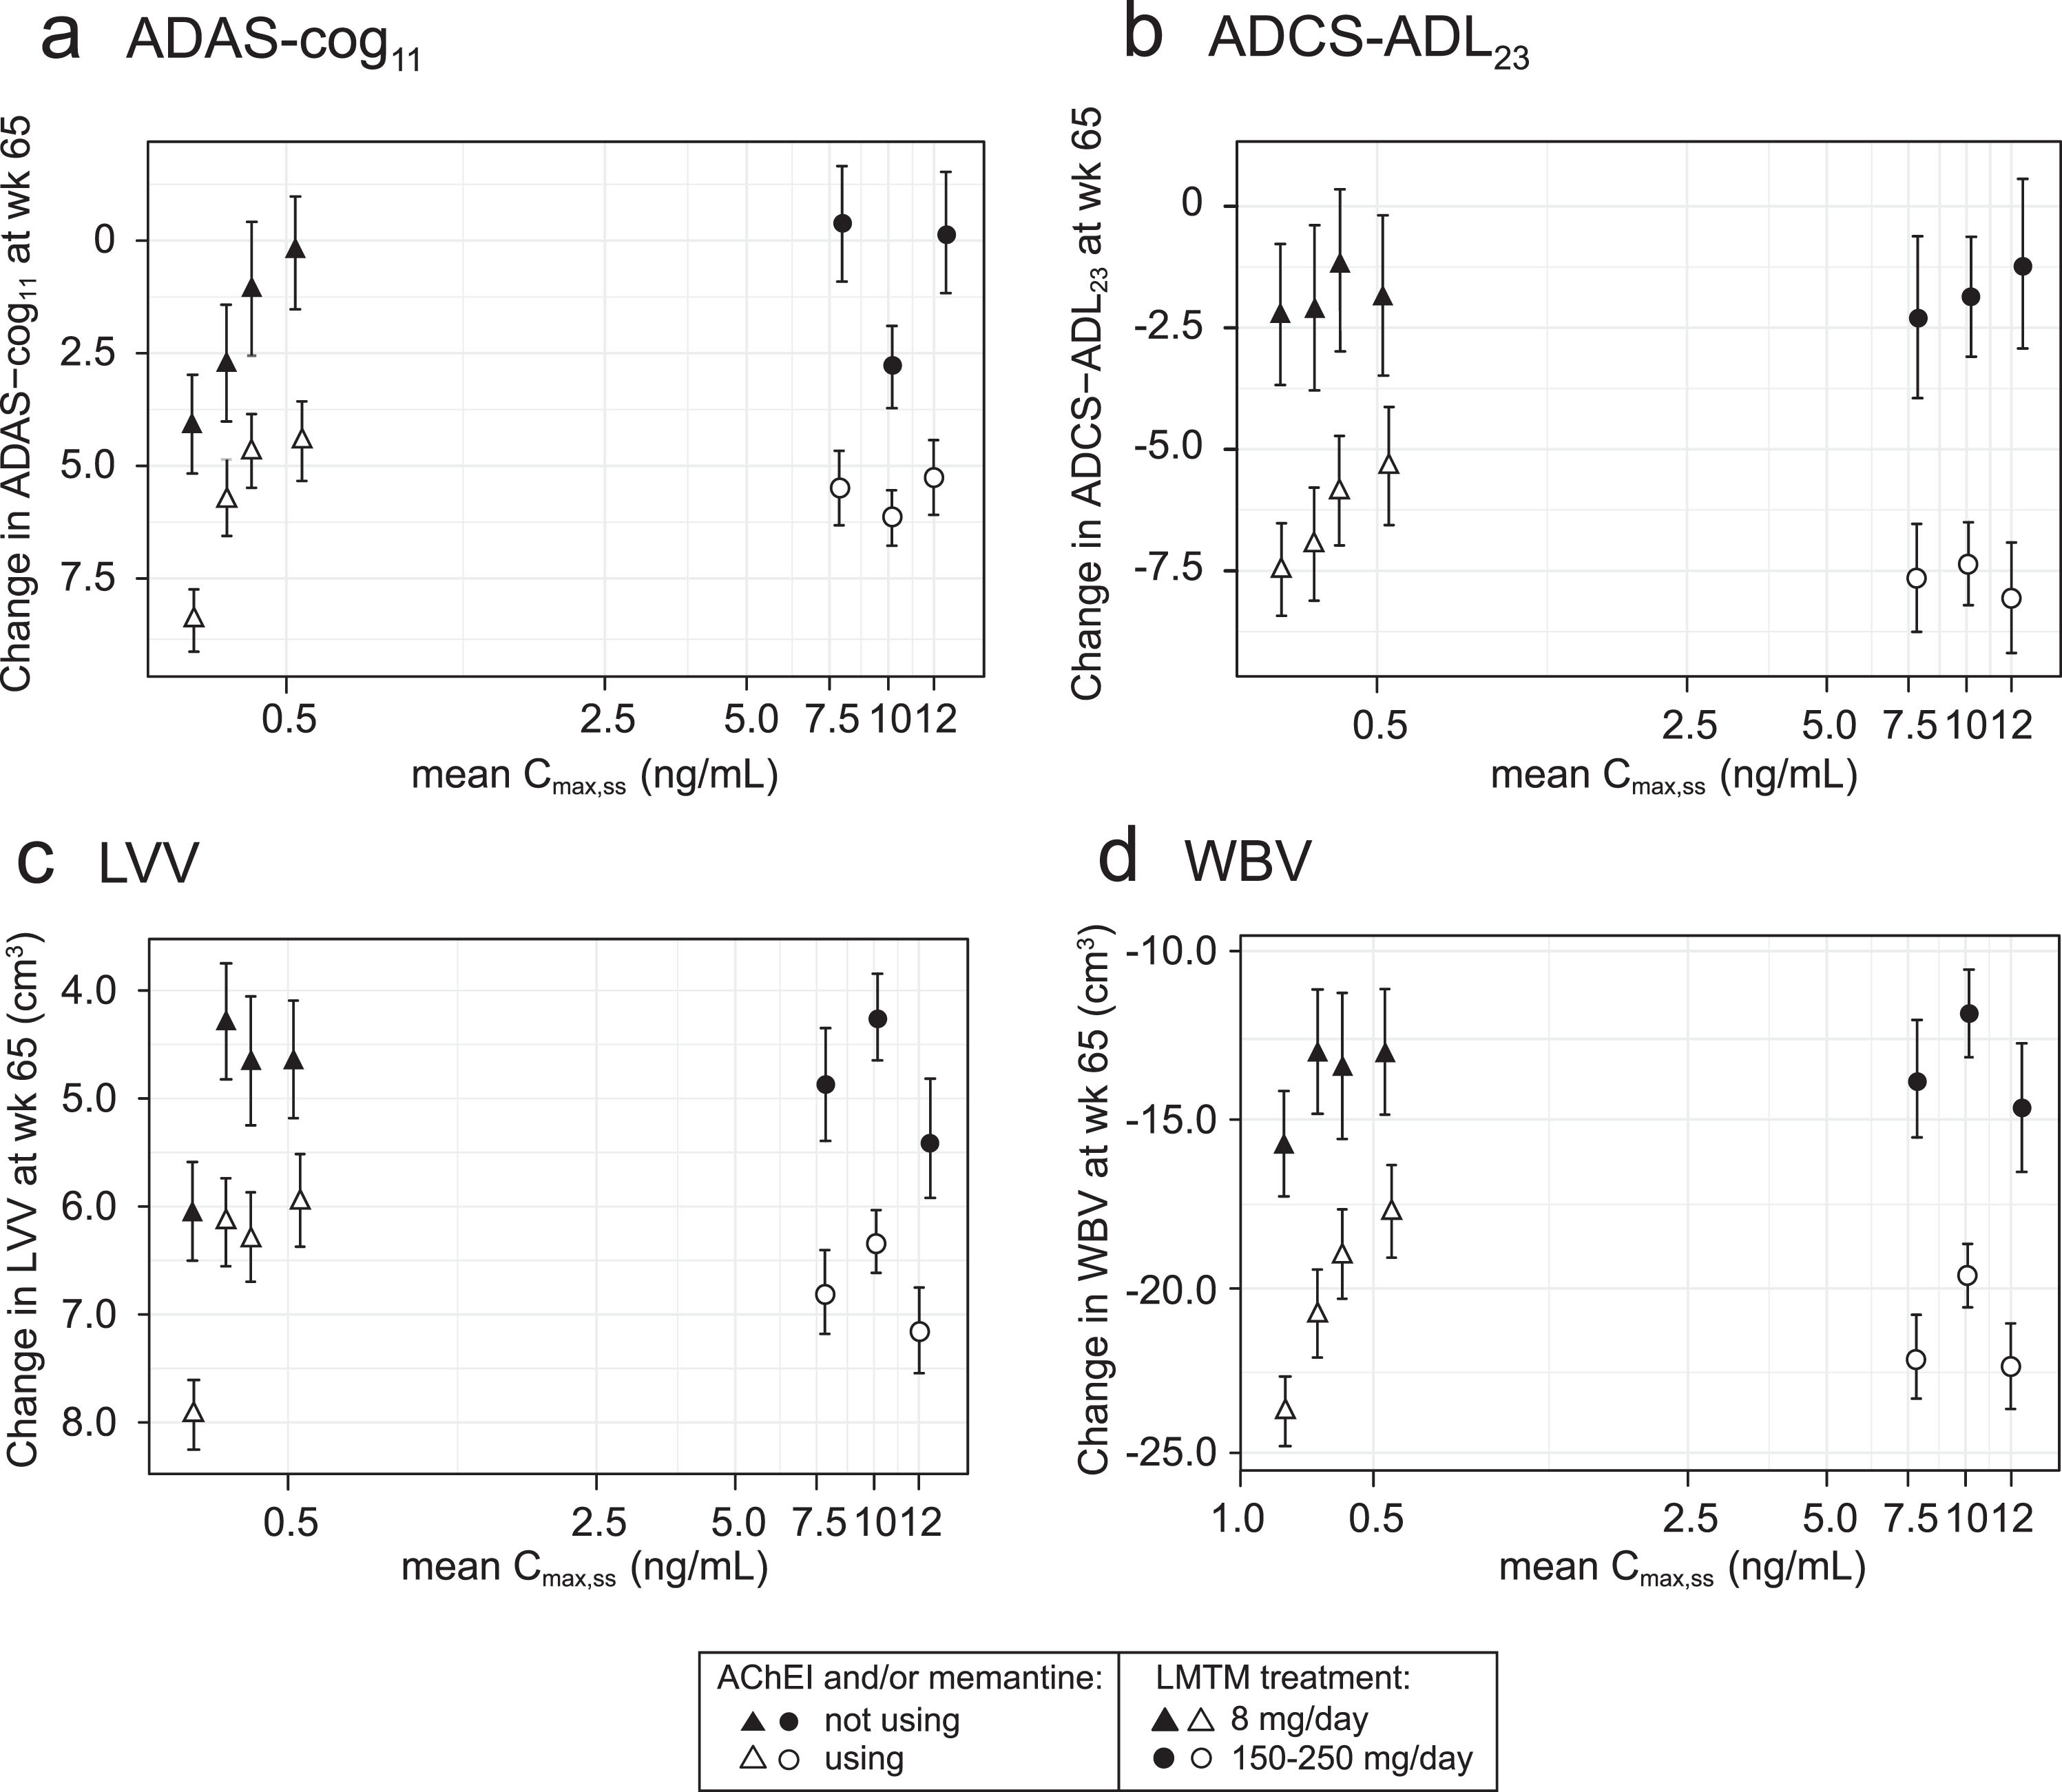 Model-derived least squares mean and standard error estimates of change over 65 weeks for clinical (a, b) and MRI volumetric endpoints (c, d) according to plasma concentration group (8 mg/day) or dose (150–250 mg/day) split by co-medication status with AD-approved drugs.